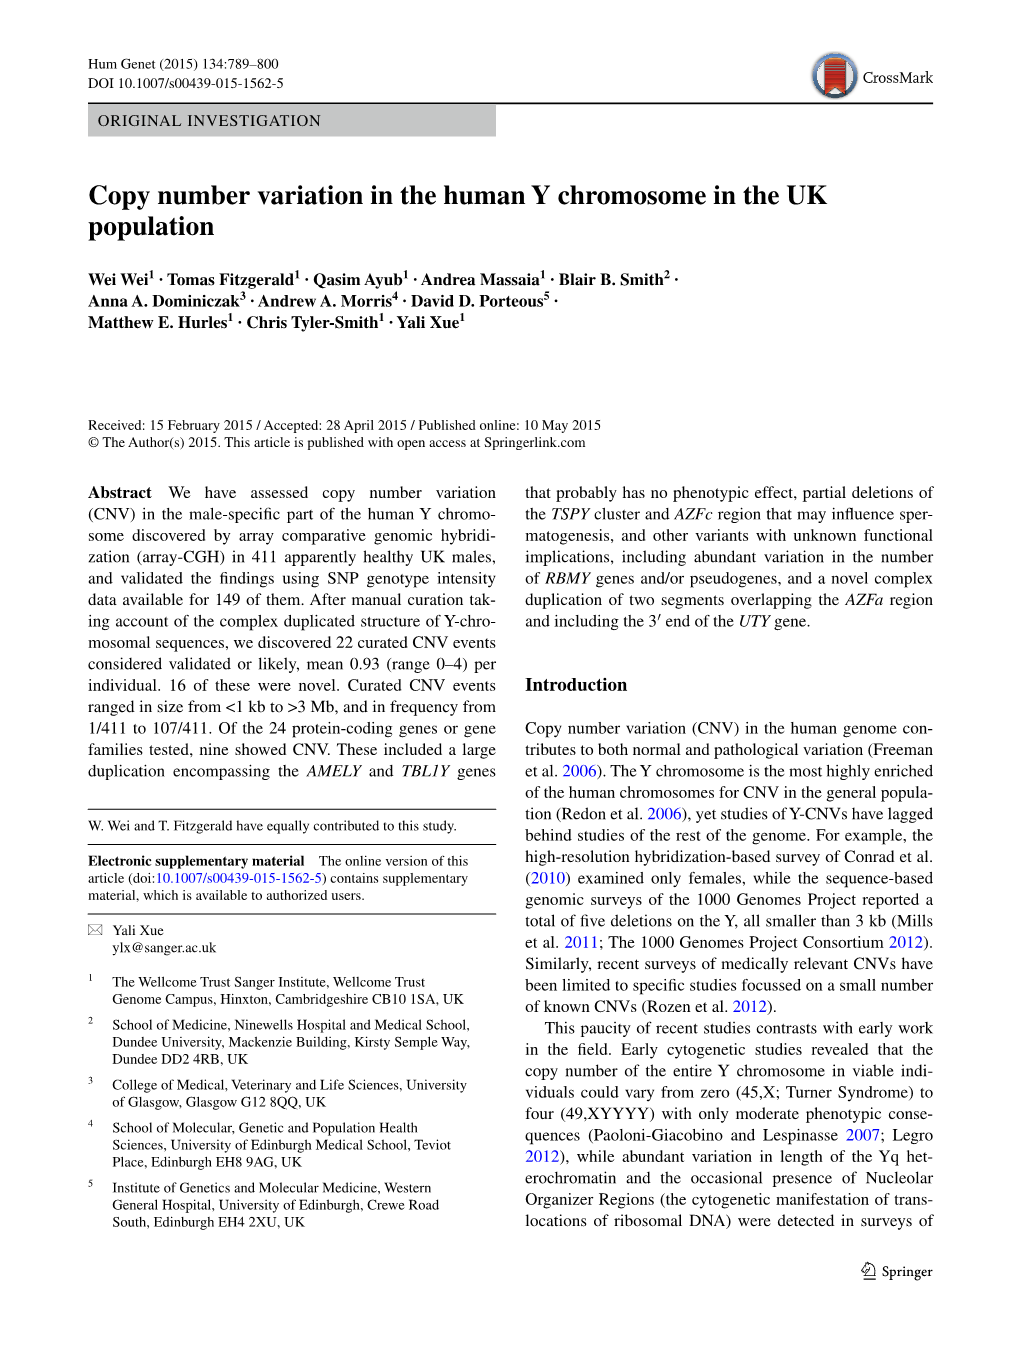 Copy Number Variation in the Human Y Chromosome in the UK Population